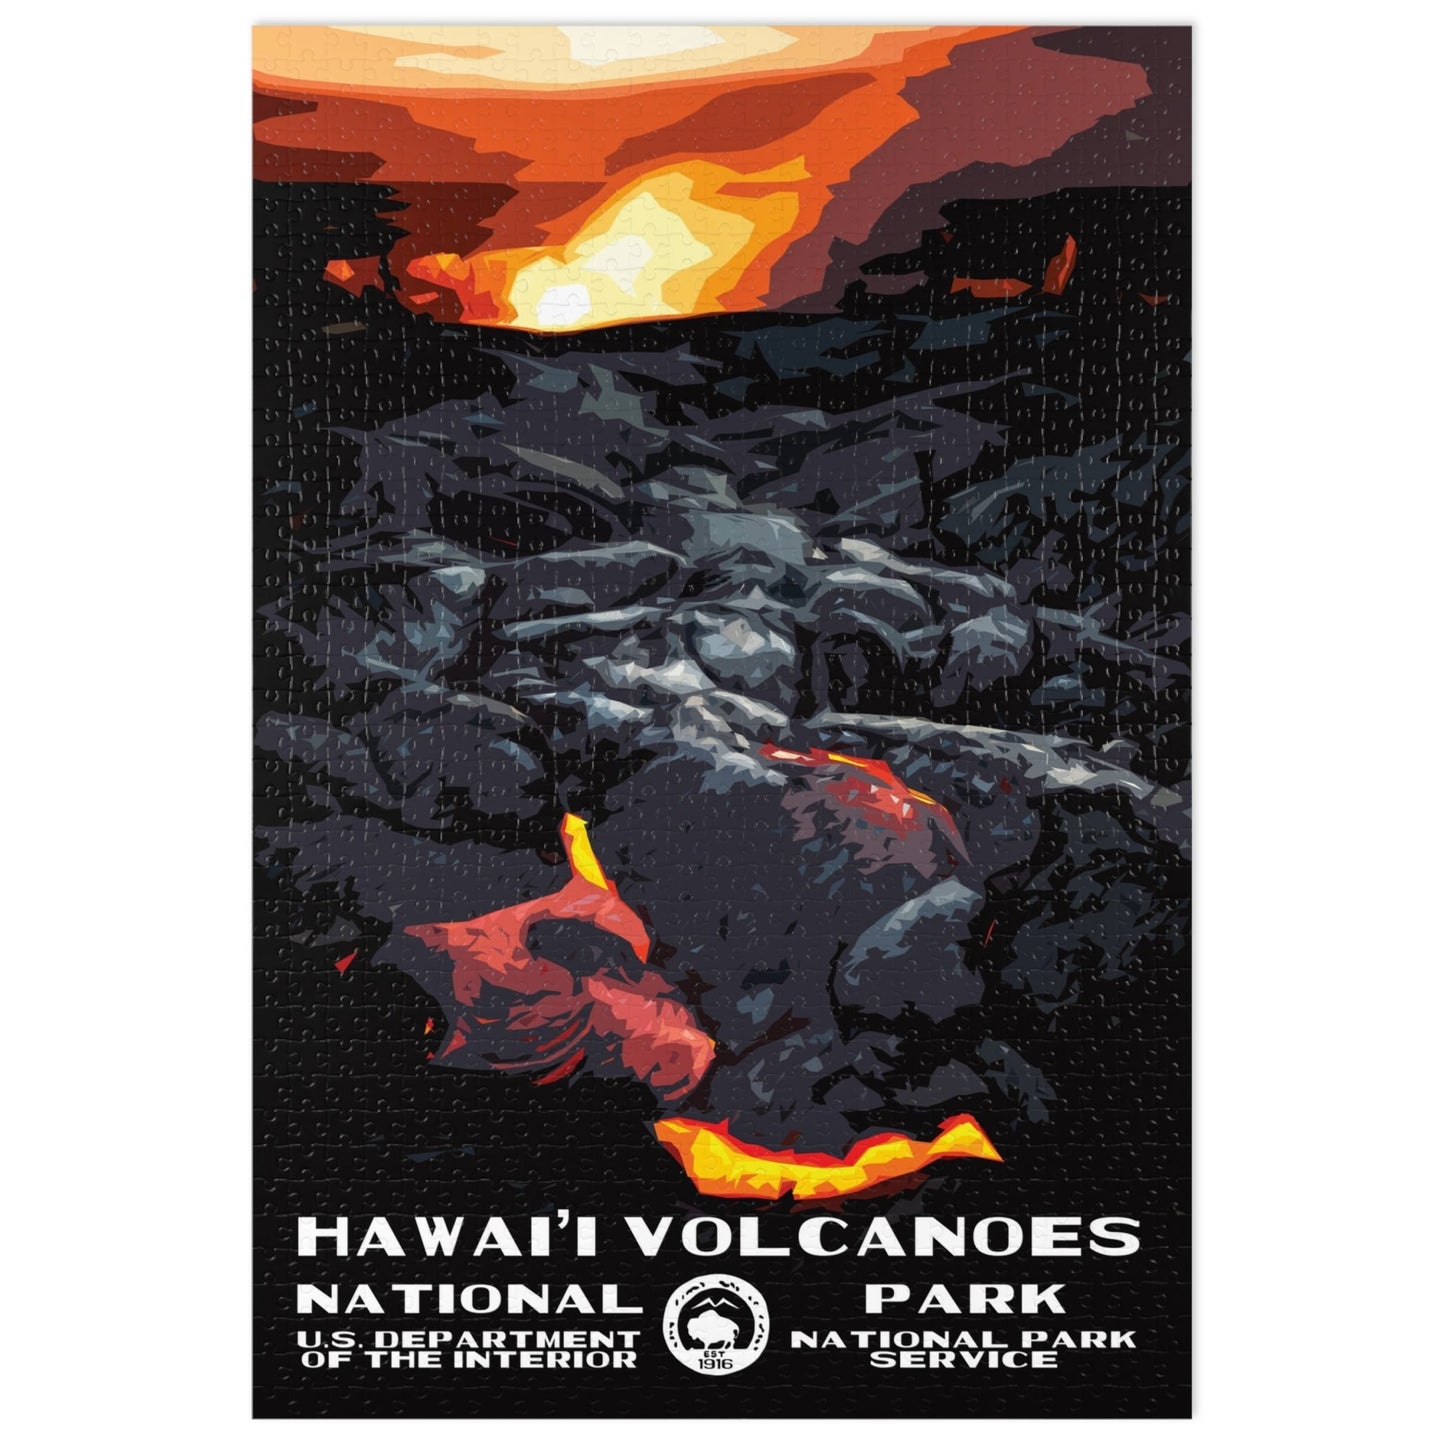 Hawaii Volcanoes National Park Jigsaw Puzzle - 1000 Pieces